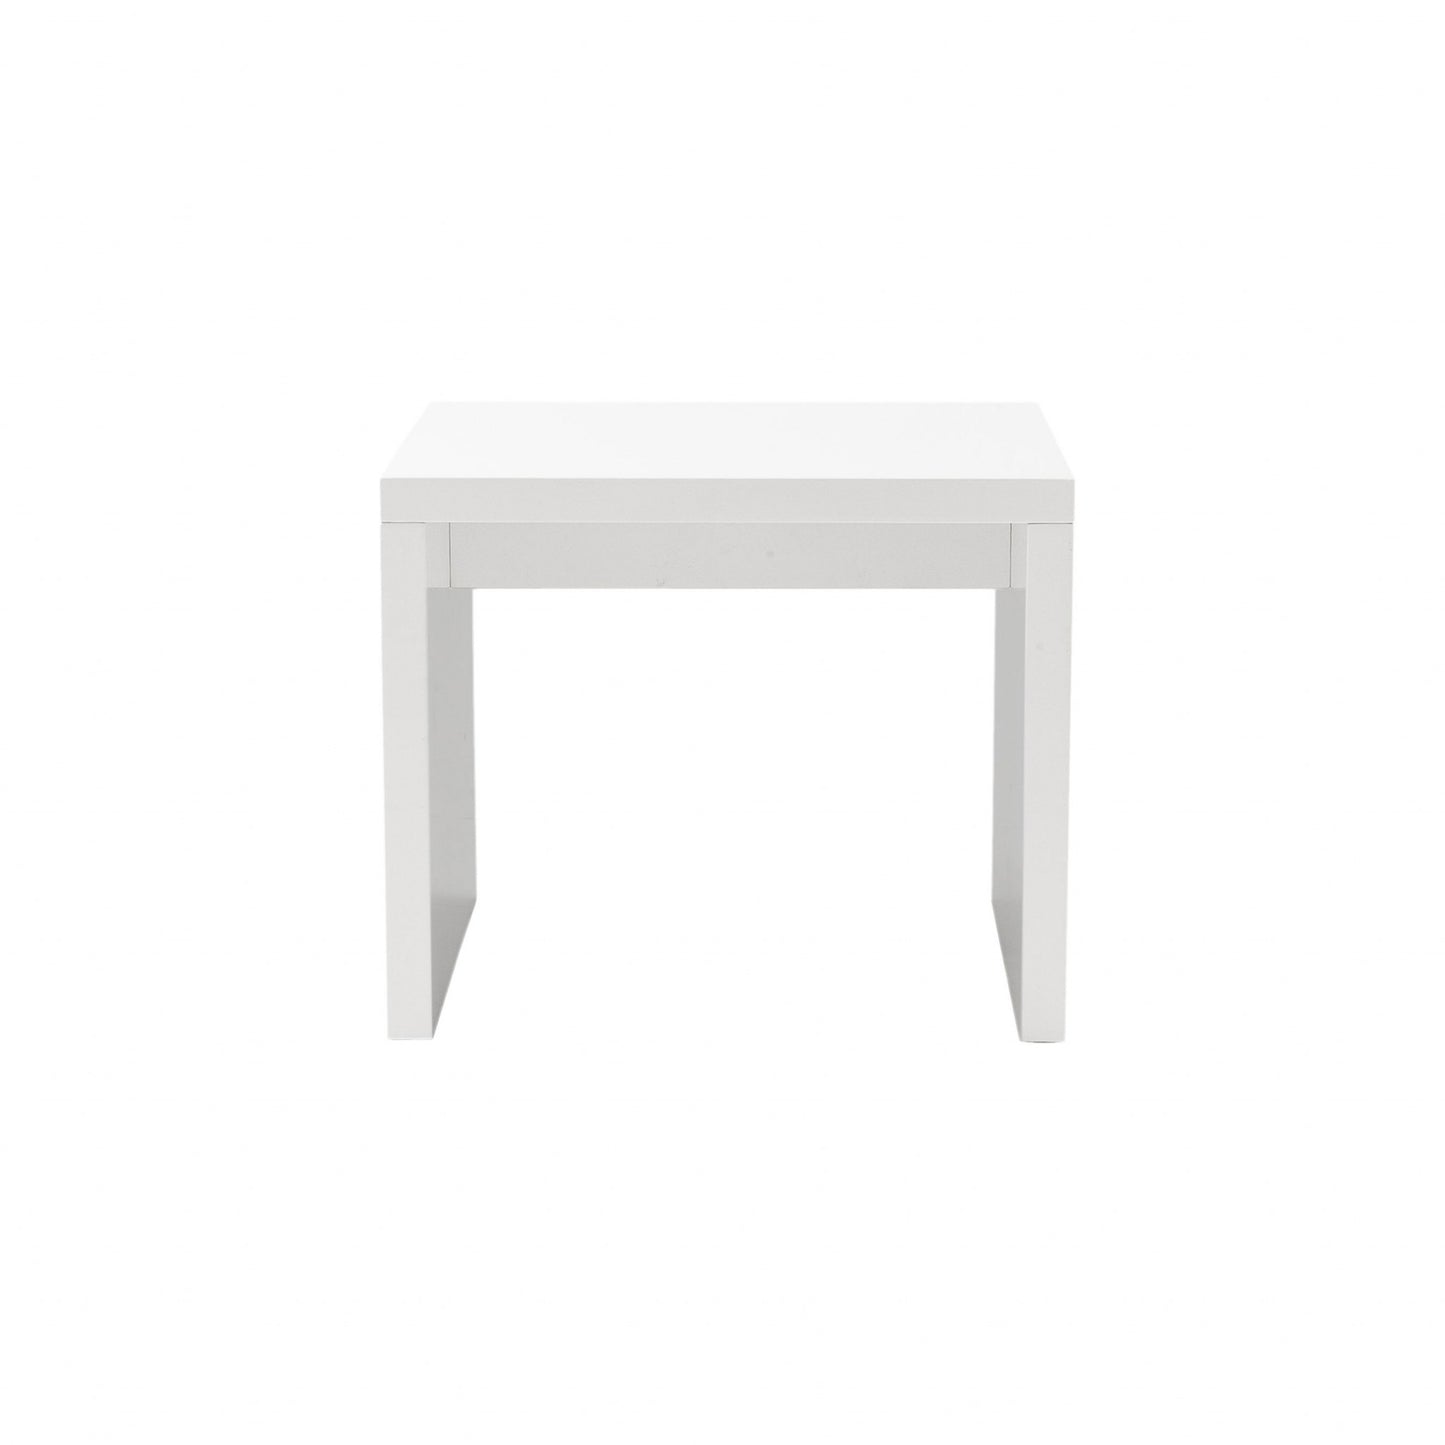 23.63" X 23.63" X 20.08" High Gloss White Lacquered Mdf Square Side Table